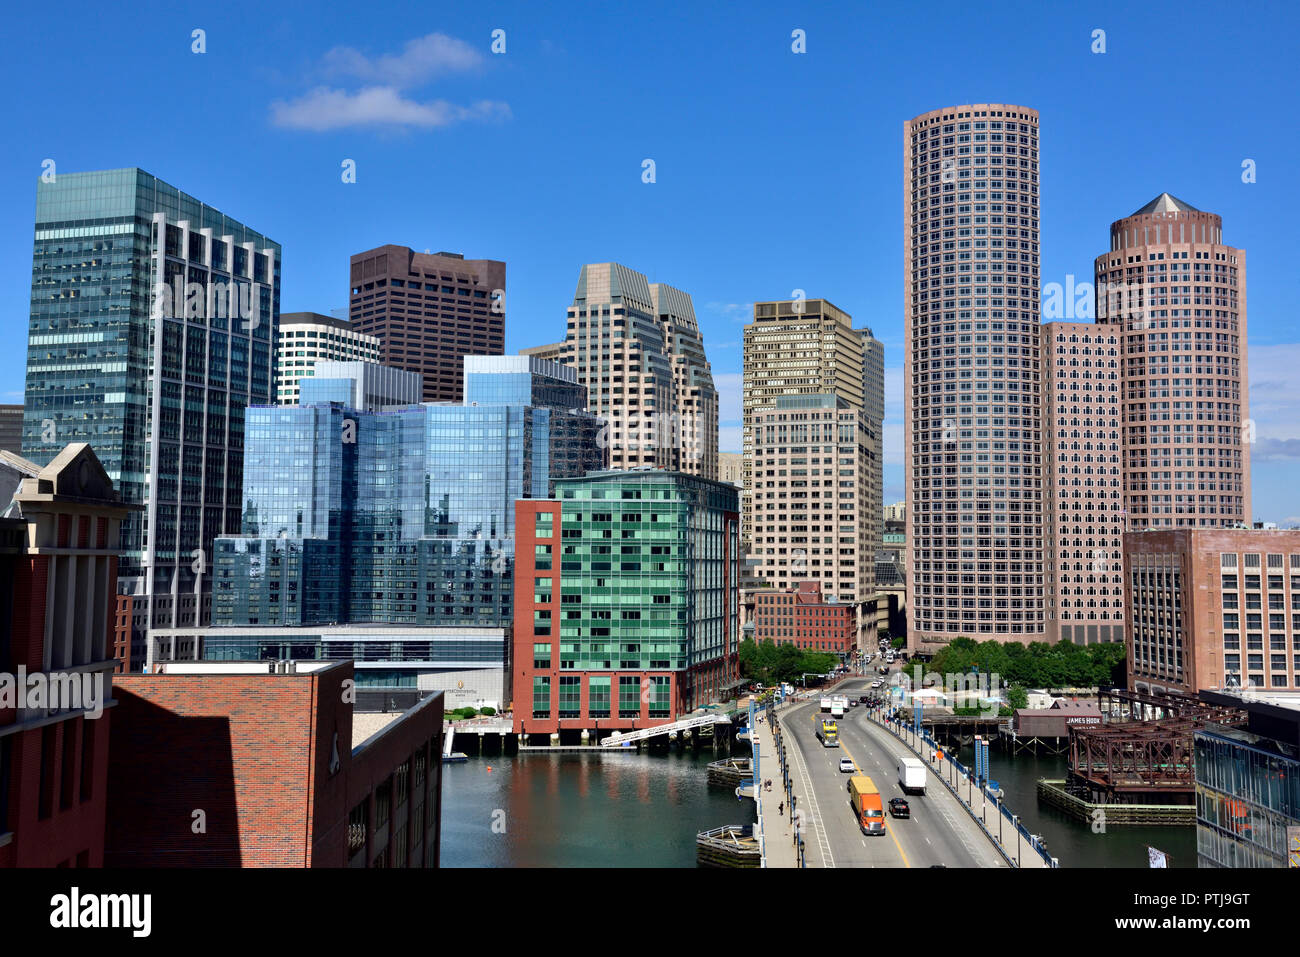 Downtown Boston skyline. Seaport Blvd leading into the commercial district. Stock Photo